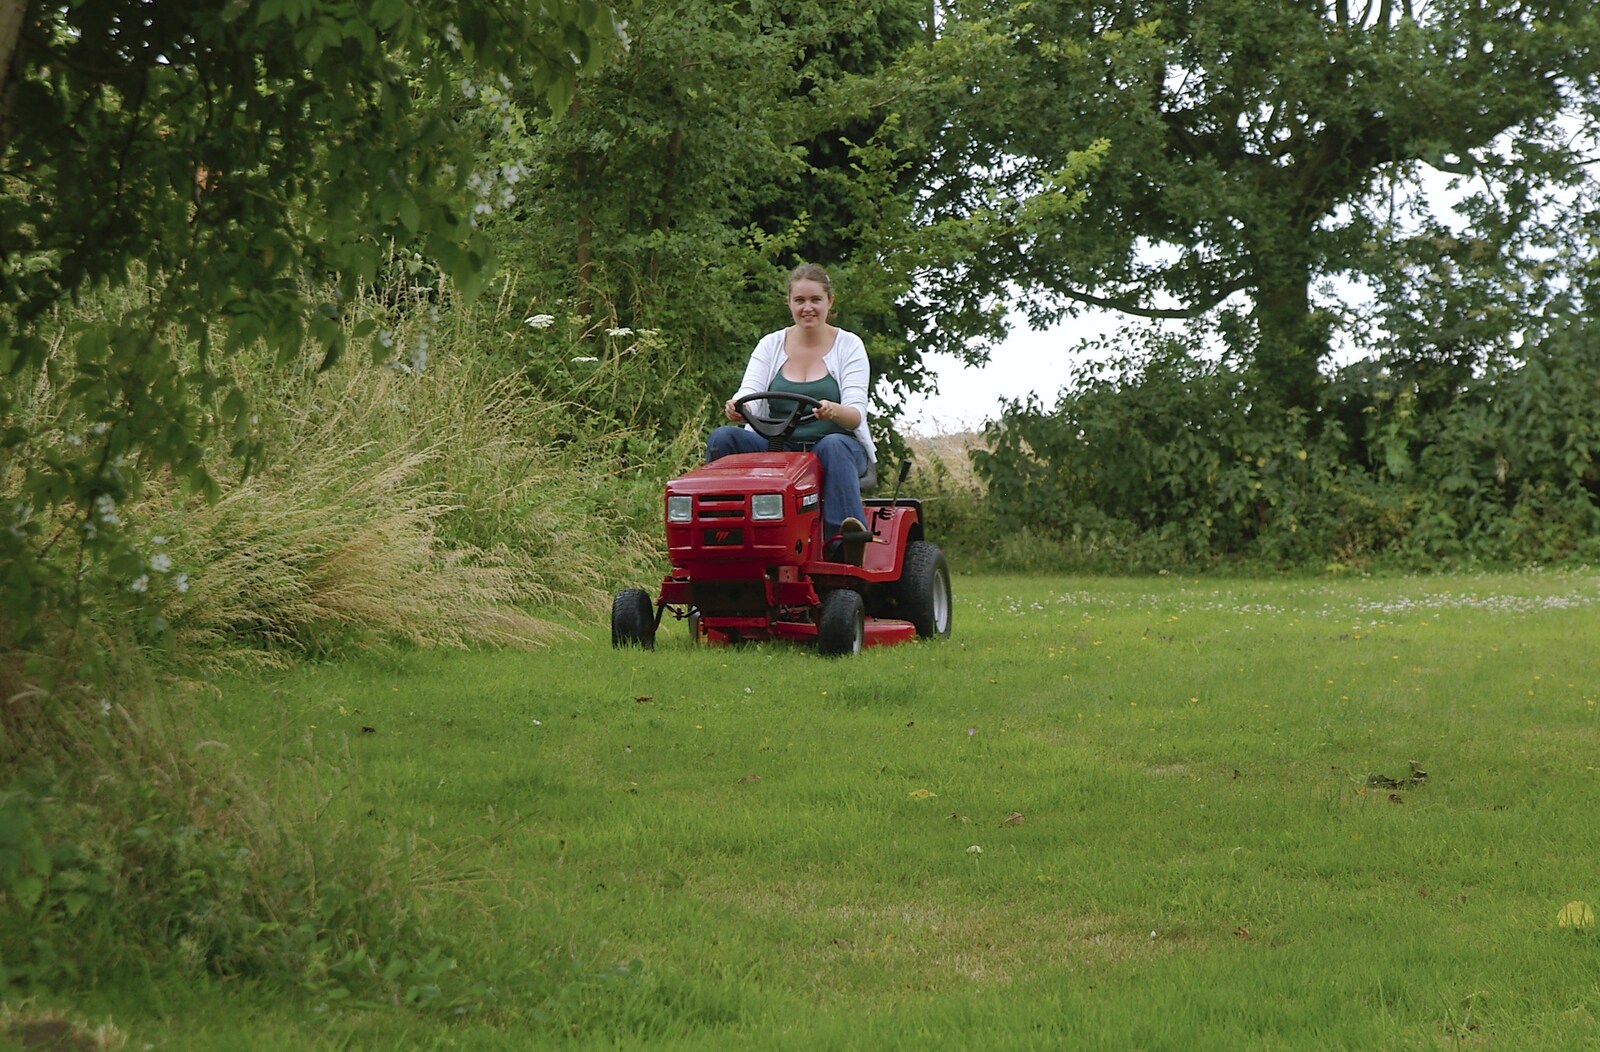 Isobel mows the lawn from The BBs Play Yaxley Hall, Yaxley, Suffolk - 7th July 2006